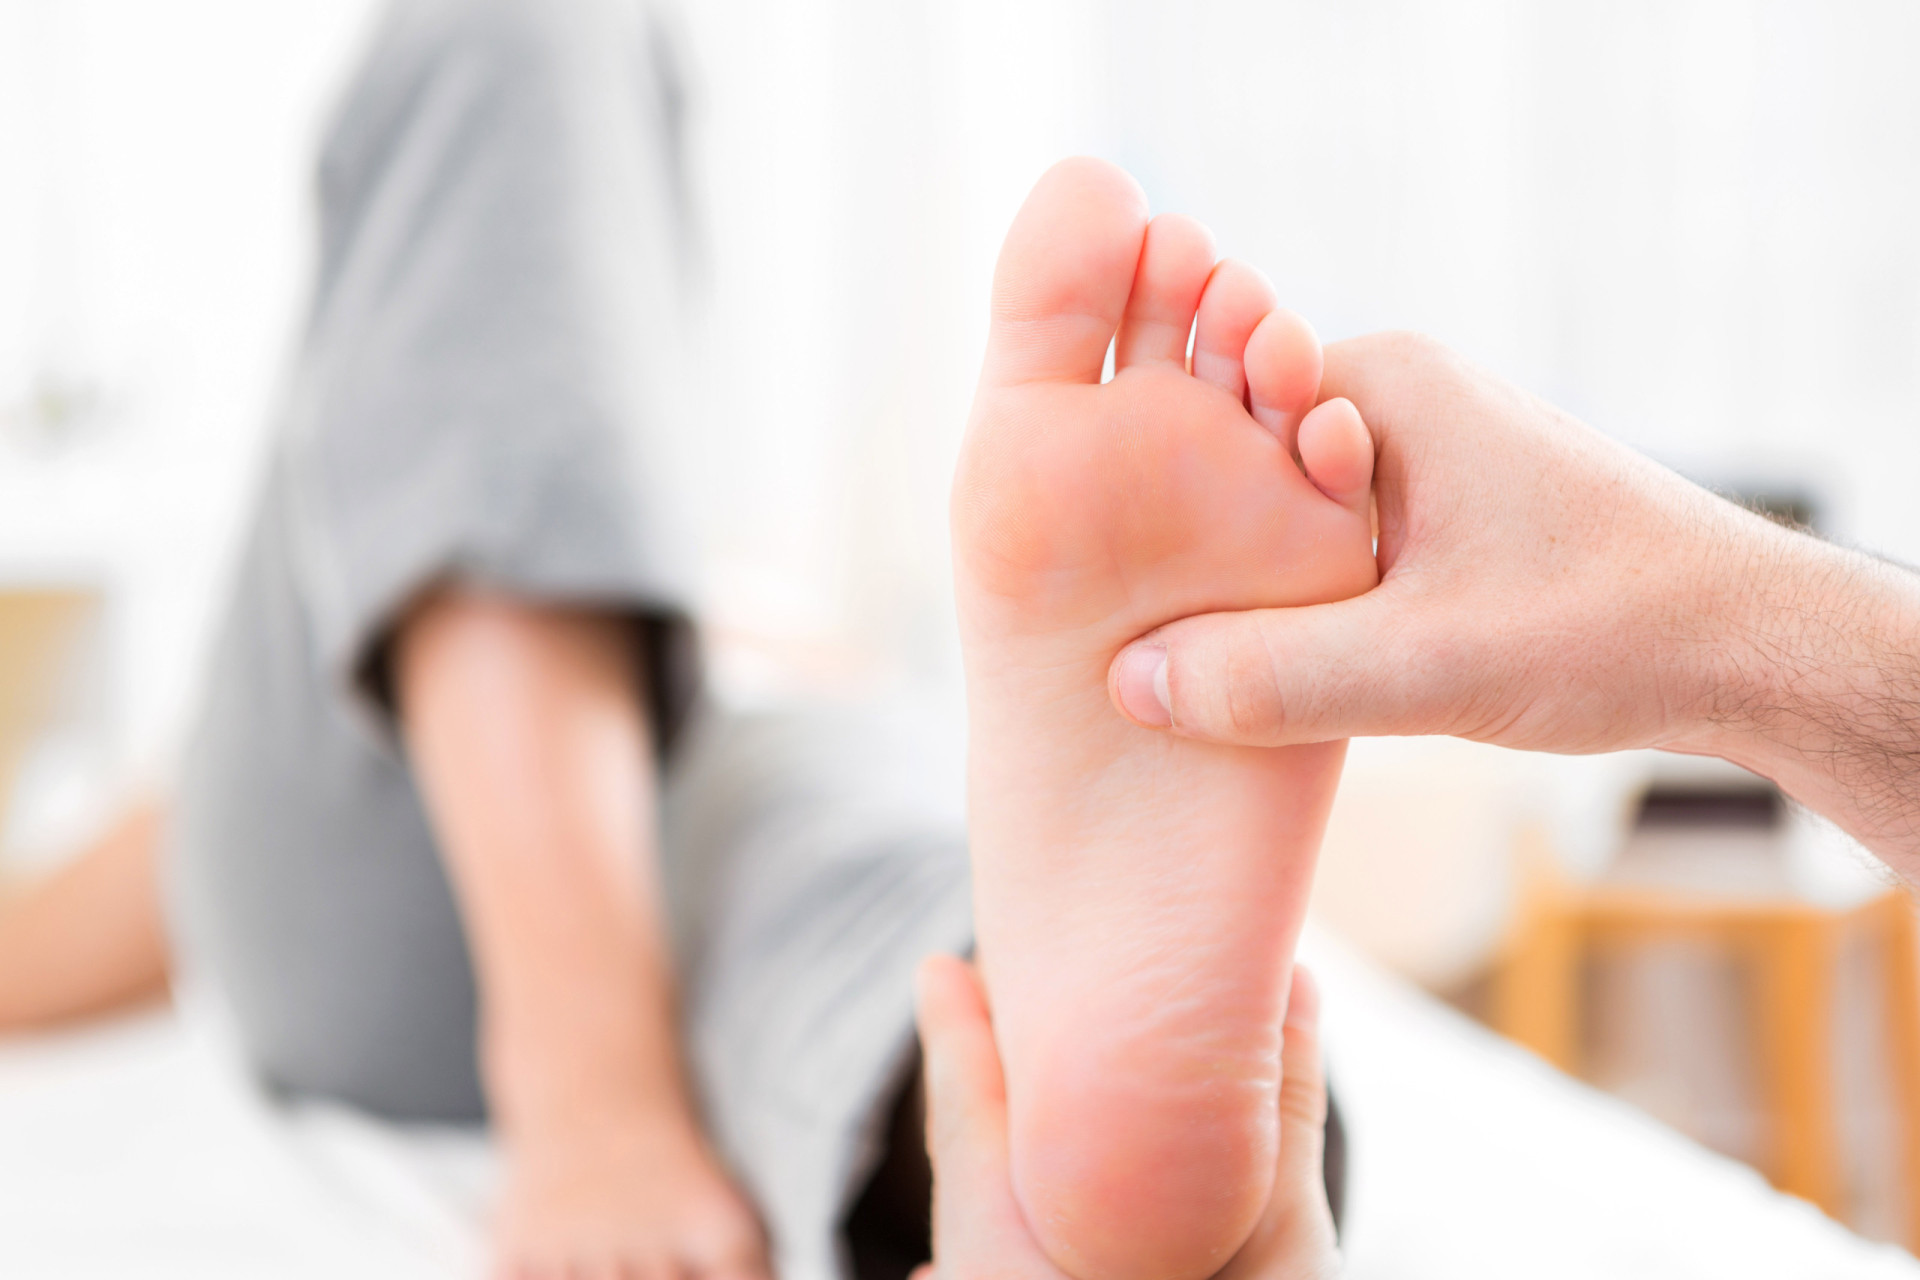 <p>As stress and pain are linked to health problems, by alleviating these reflexology could indirectly lead to other health benefits.</p>